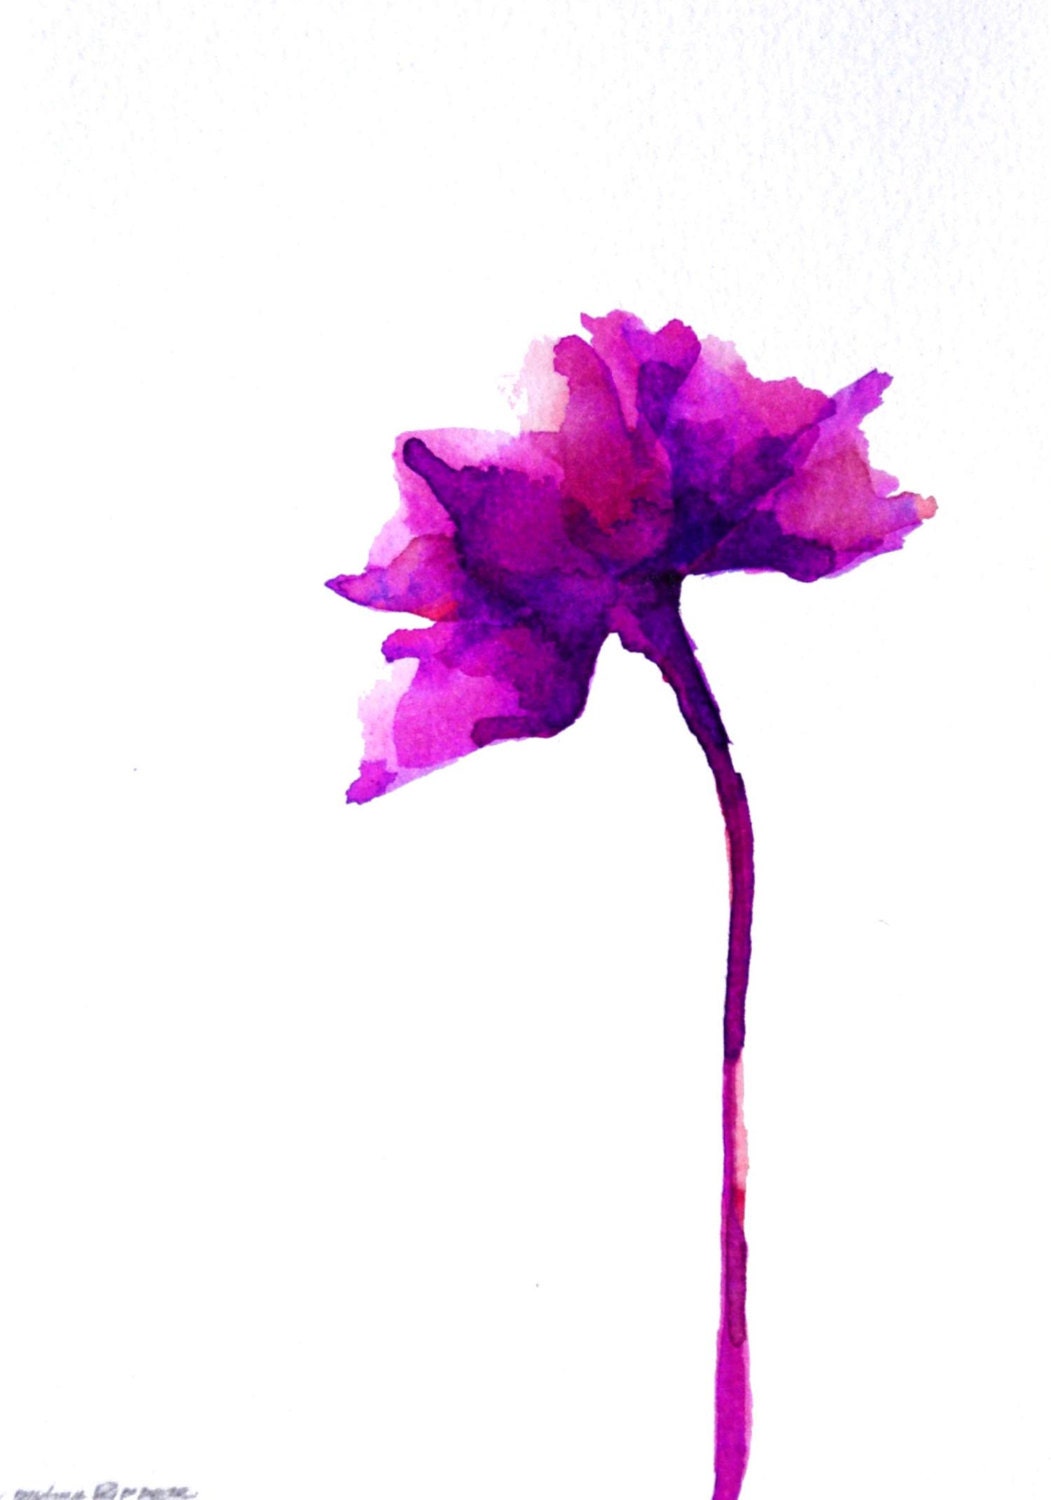 FLOWERS - Drawings with Ink on acid free paper Sennelier/Paris 200gr  by Cristina Ripper. violet / purple / blue - SimpleArtStudio